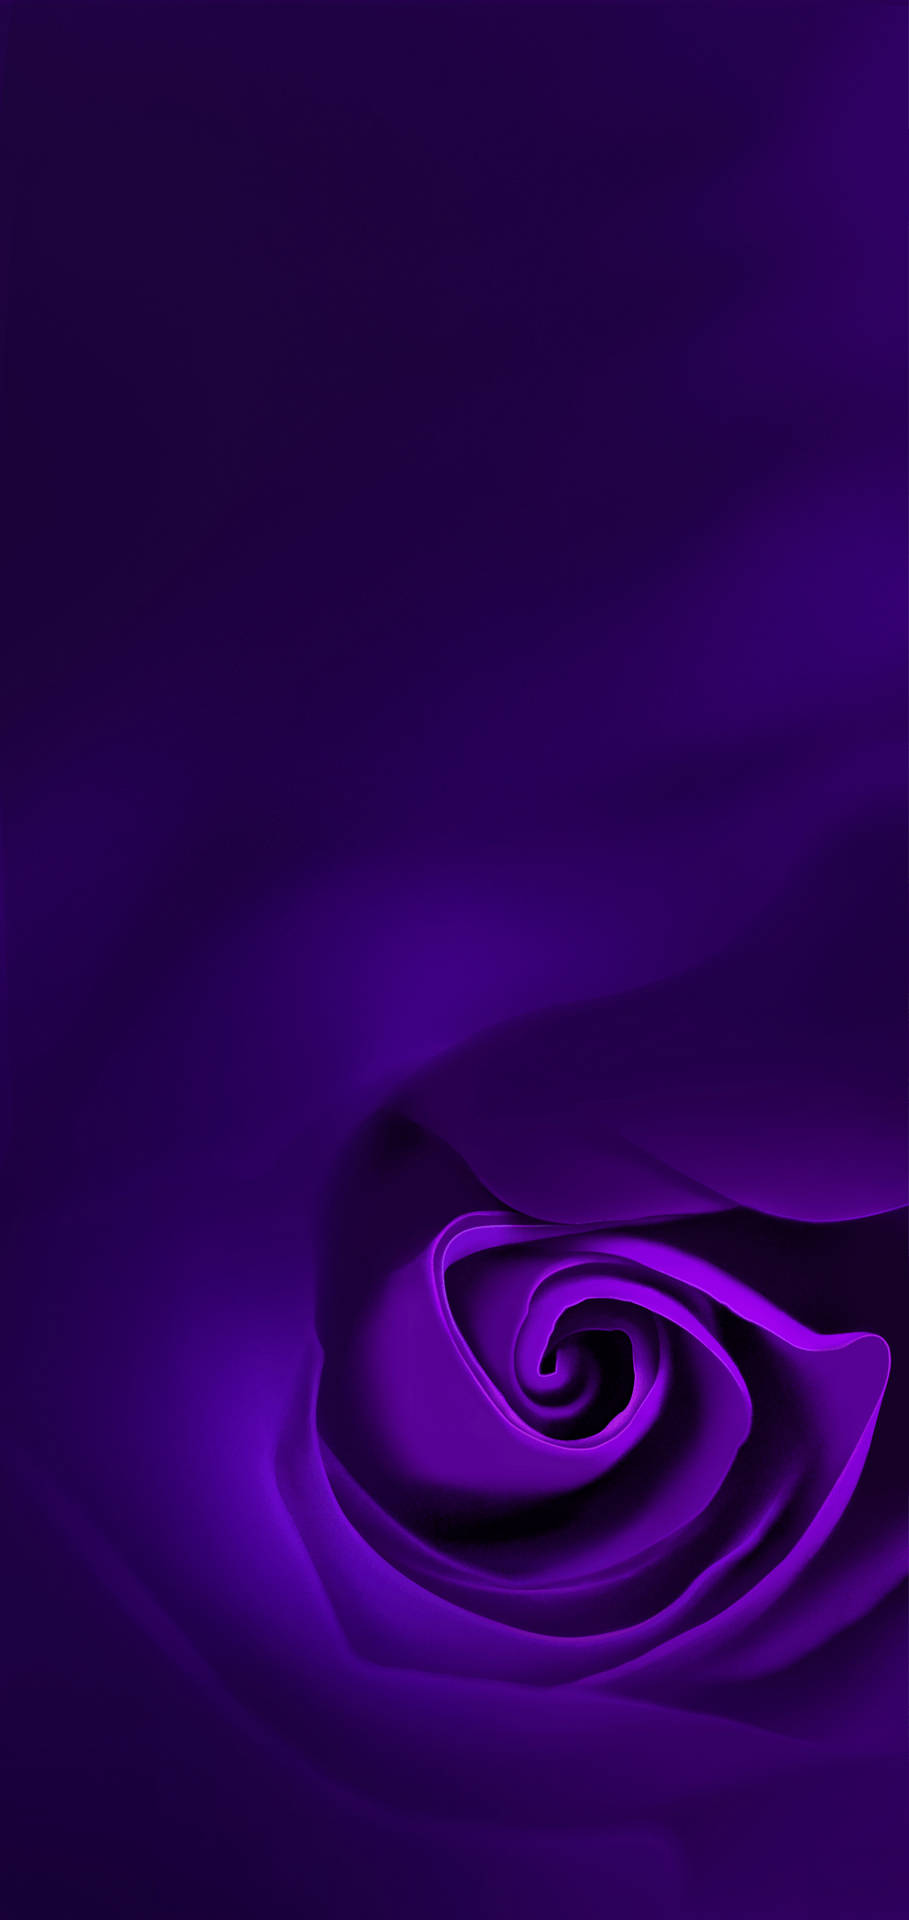 Abstractviolet Rose Oppo A5s Would Be Translated To 